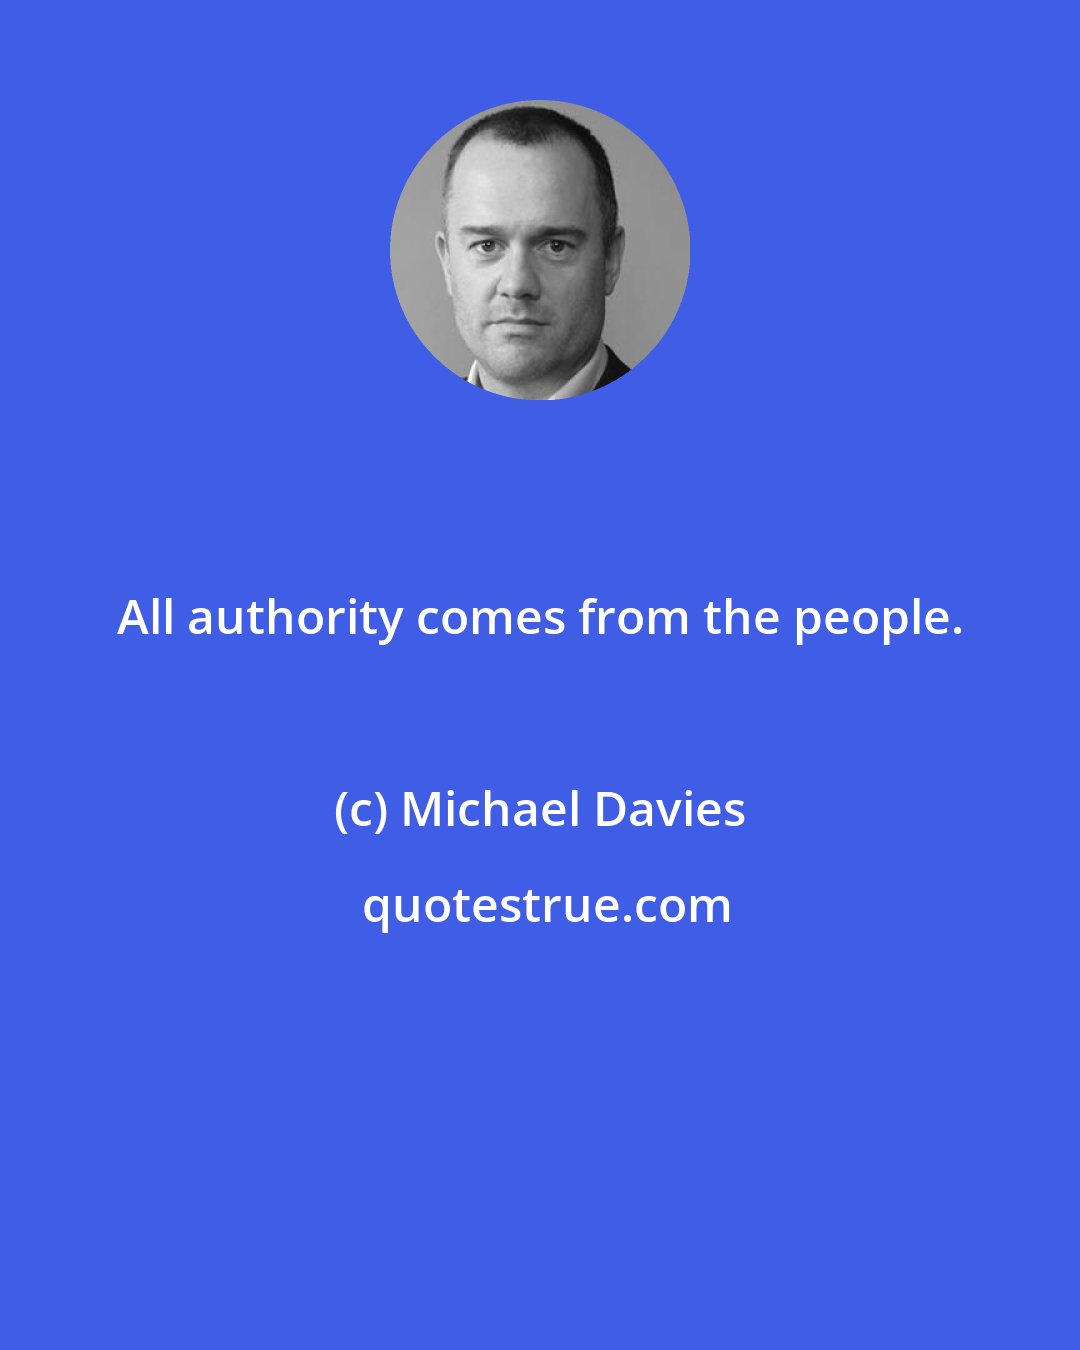 Michael Davies: All authority comes from the people.